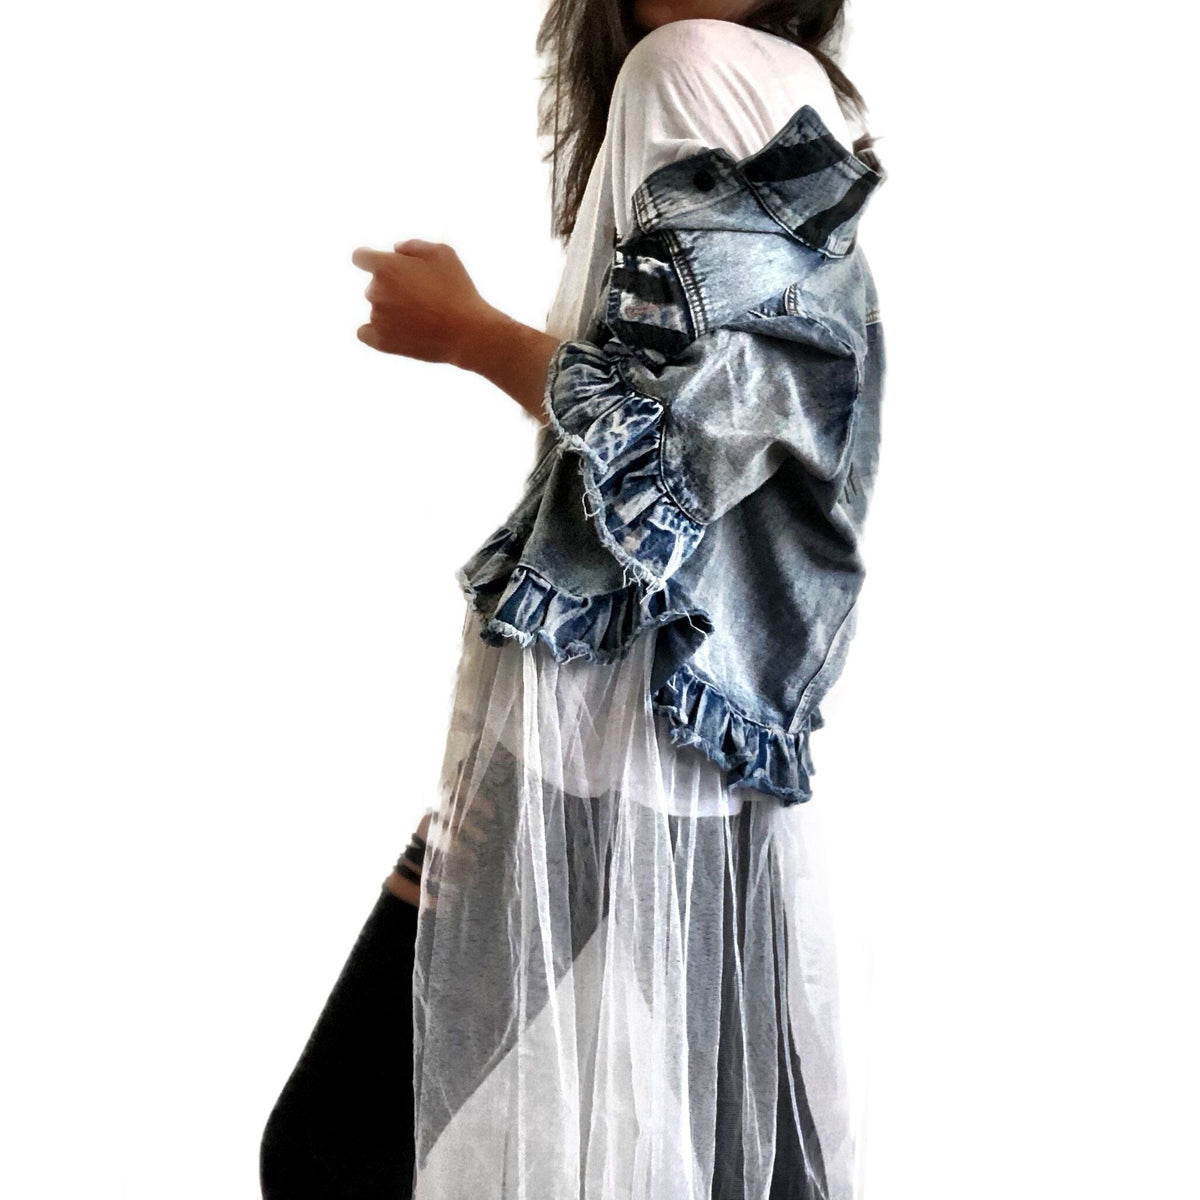 Medium blue denim short sleeve jacket with layer of long white tulle. 'But Is It Art?' painted in black on the back, with black stripes on front pockets and collar. Signed @wrenandglory.